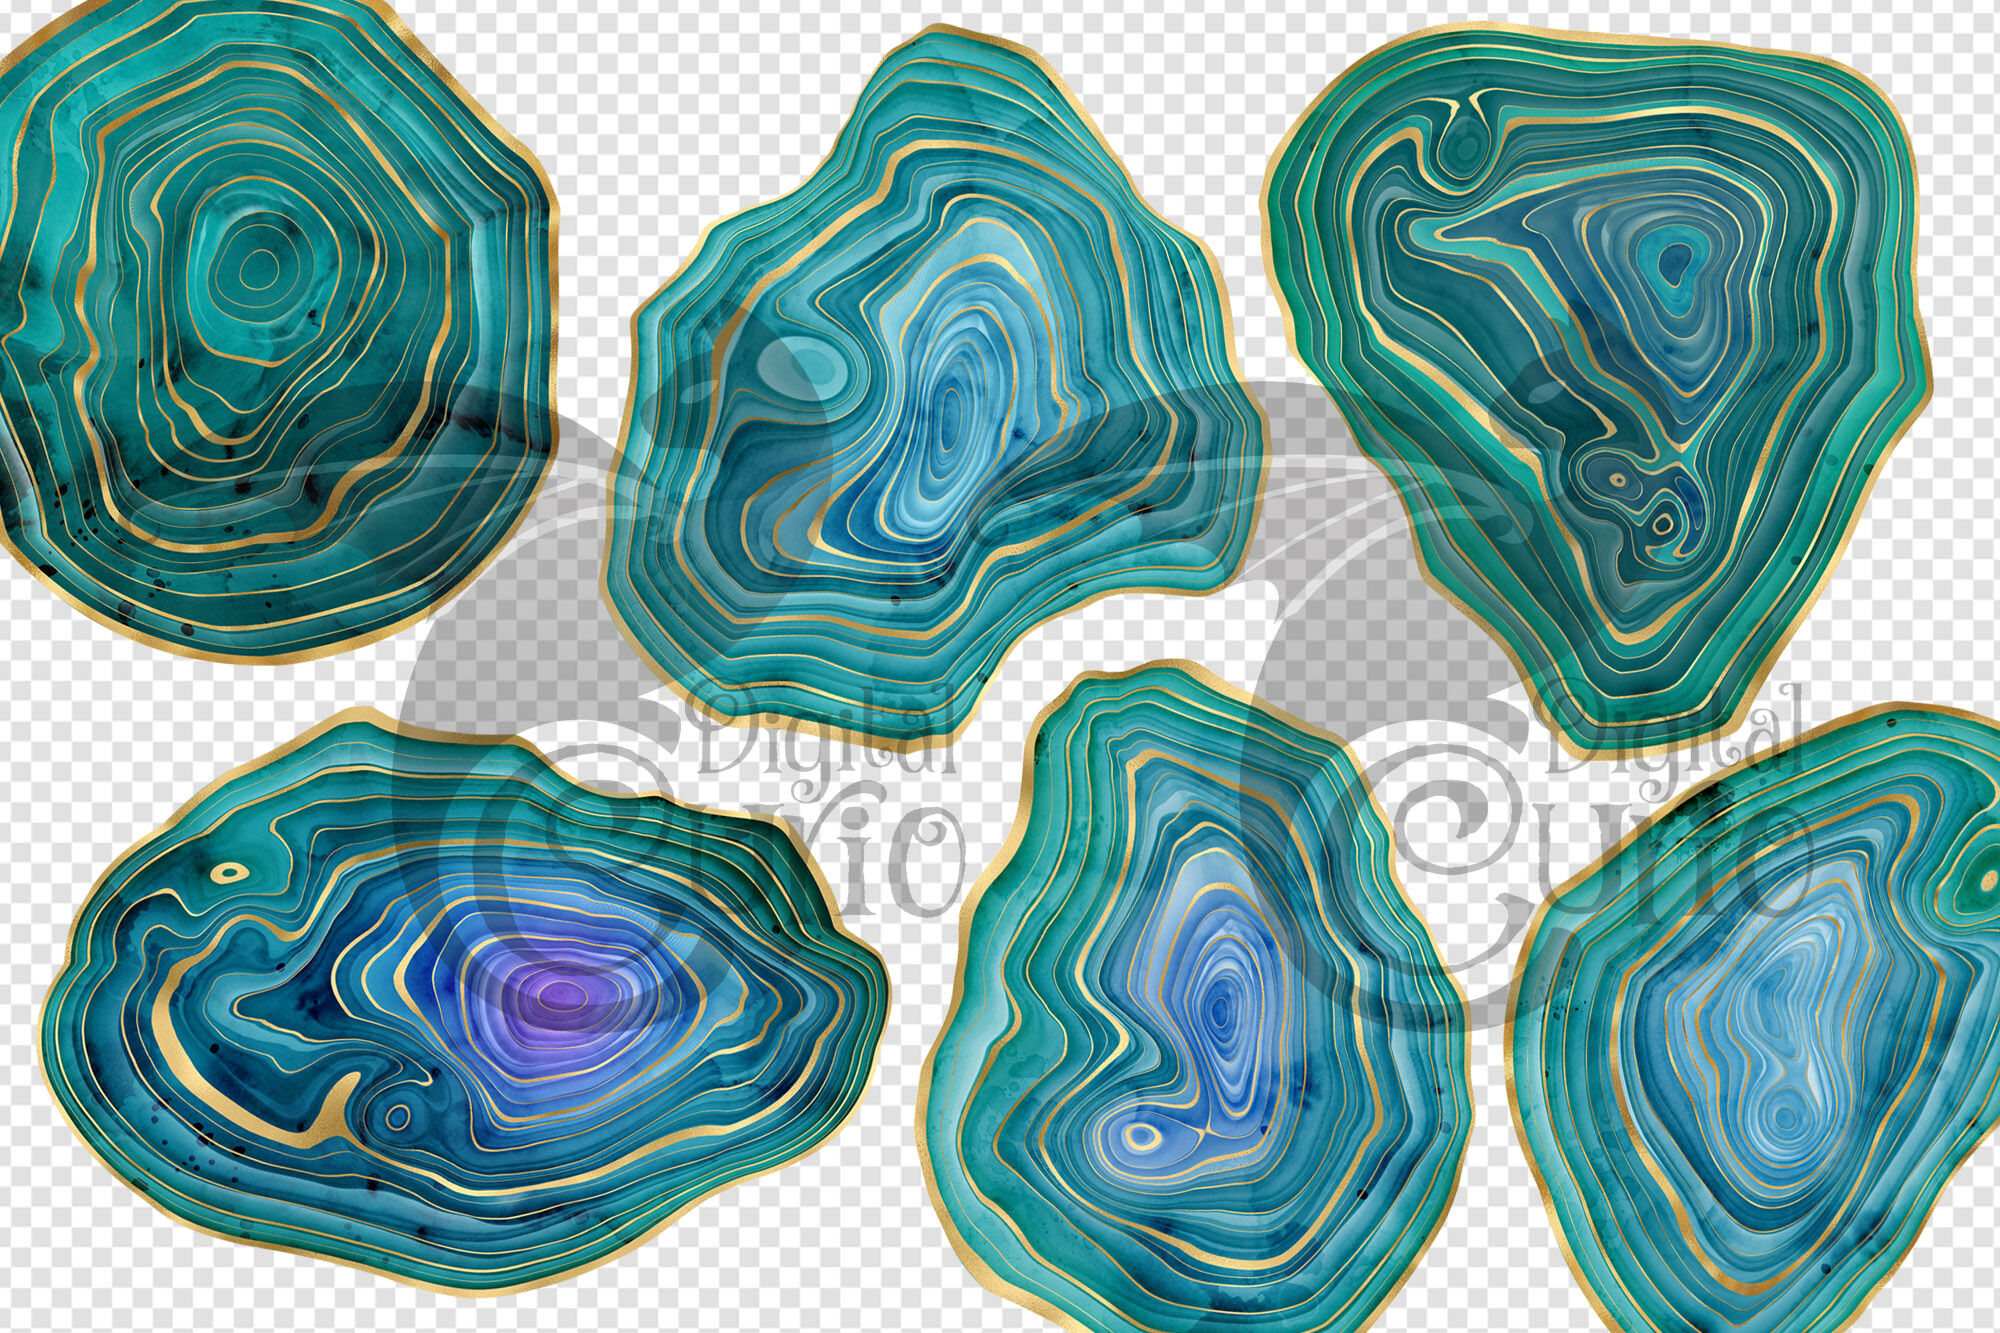 Watercolor Teal Agate Clipart By Digital Curio